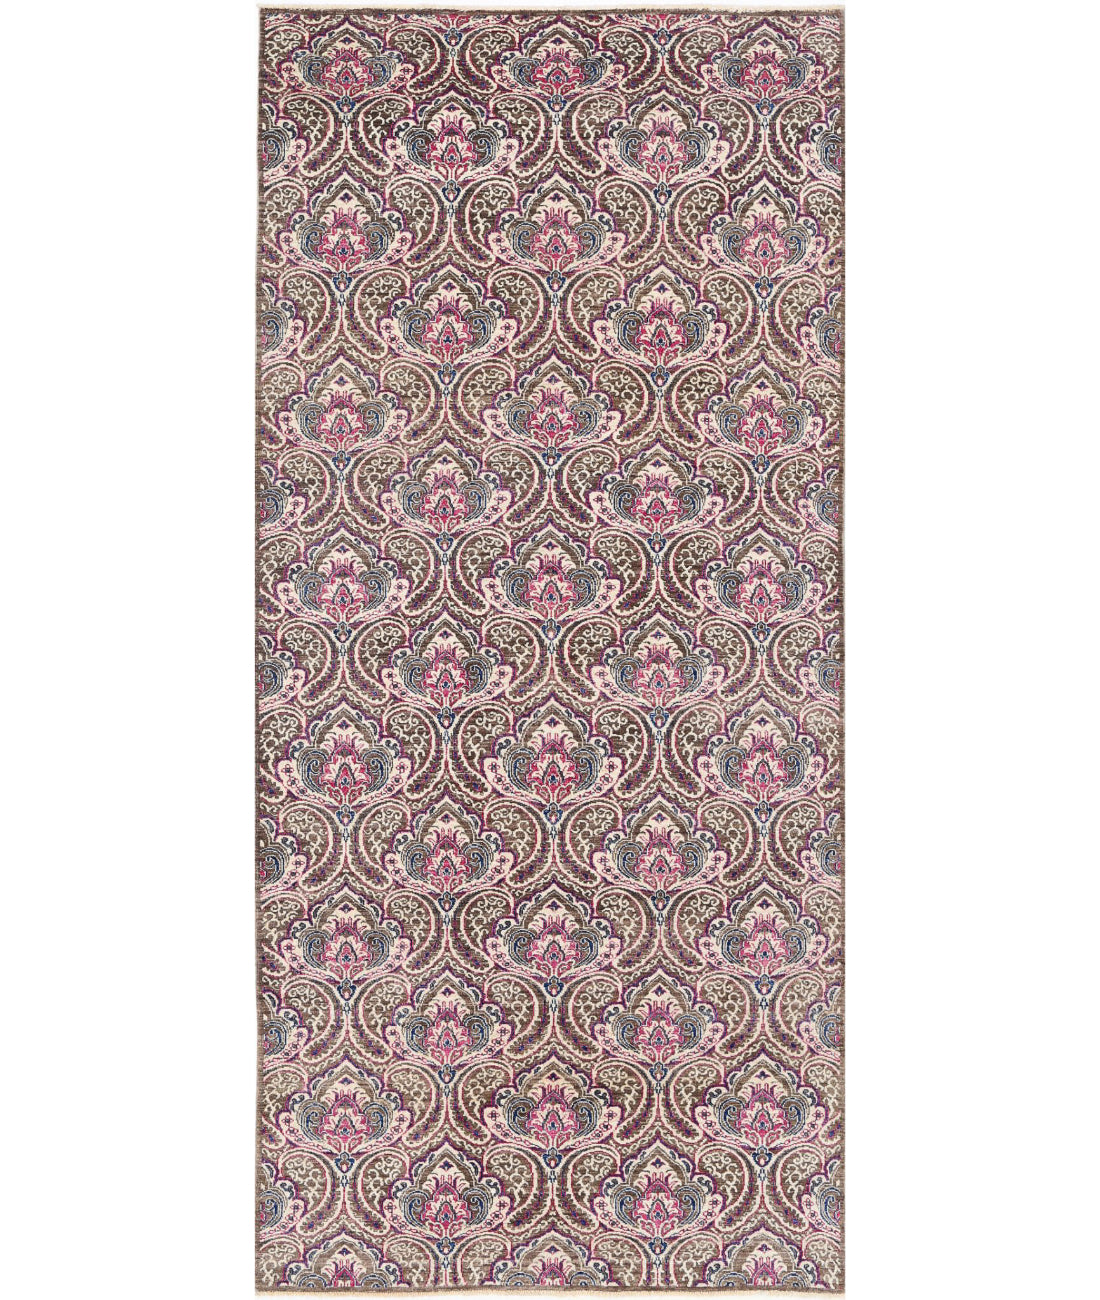 Hand Knotted Artemix Wool Rug - 5&#39;2&#39;&#39; x 11&#39;4&#39;&#39; 5&#39;2&#39;&#39; x 11&#39;4&#39;&#39; (155 X 340) / Brown / Pink